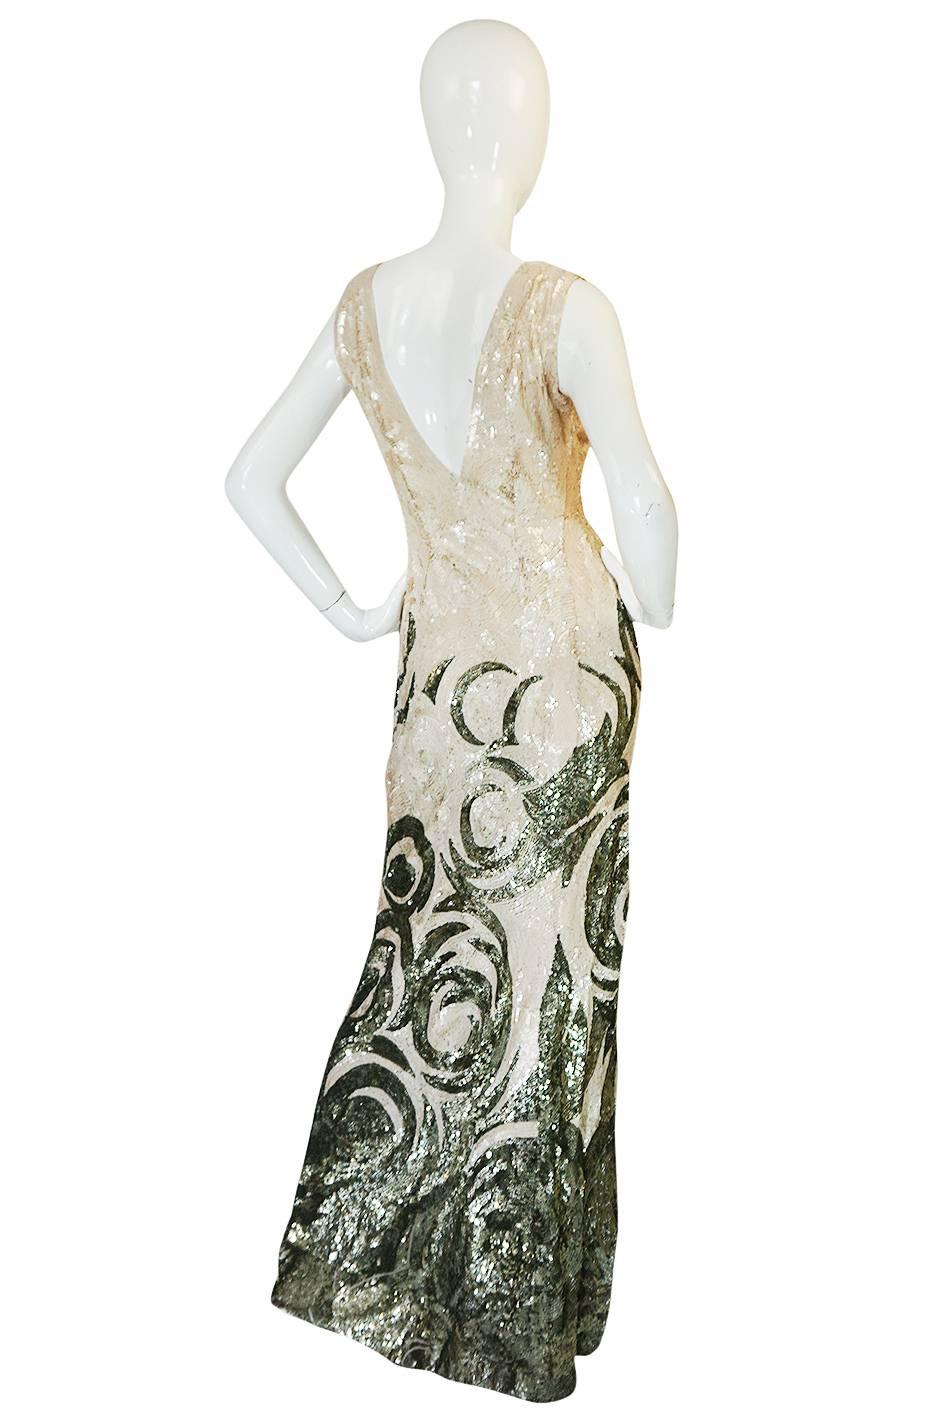 This is an exquisite late 1920s, perhaps early 1930s sequin and net gown. The exterior of the dress is entirely covered with tightly spaced, hand applied sequins in cream and a gold. It is one of the most spectacular gowns from this period I have